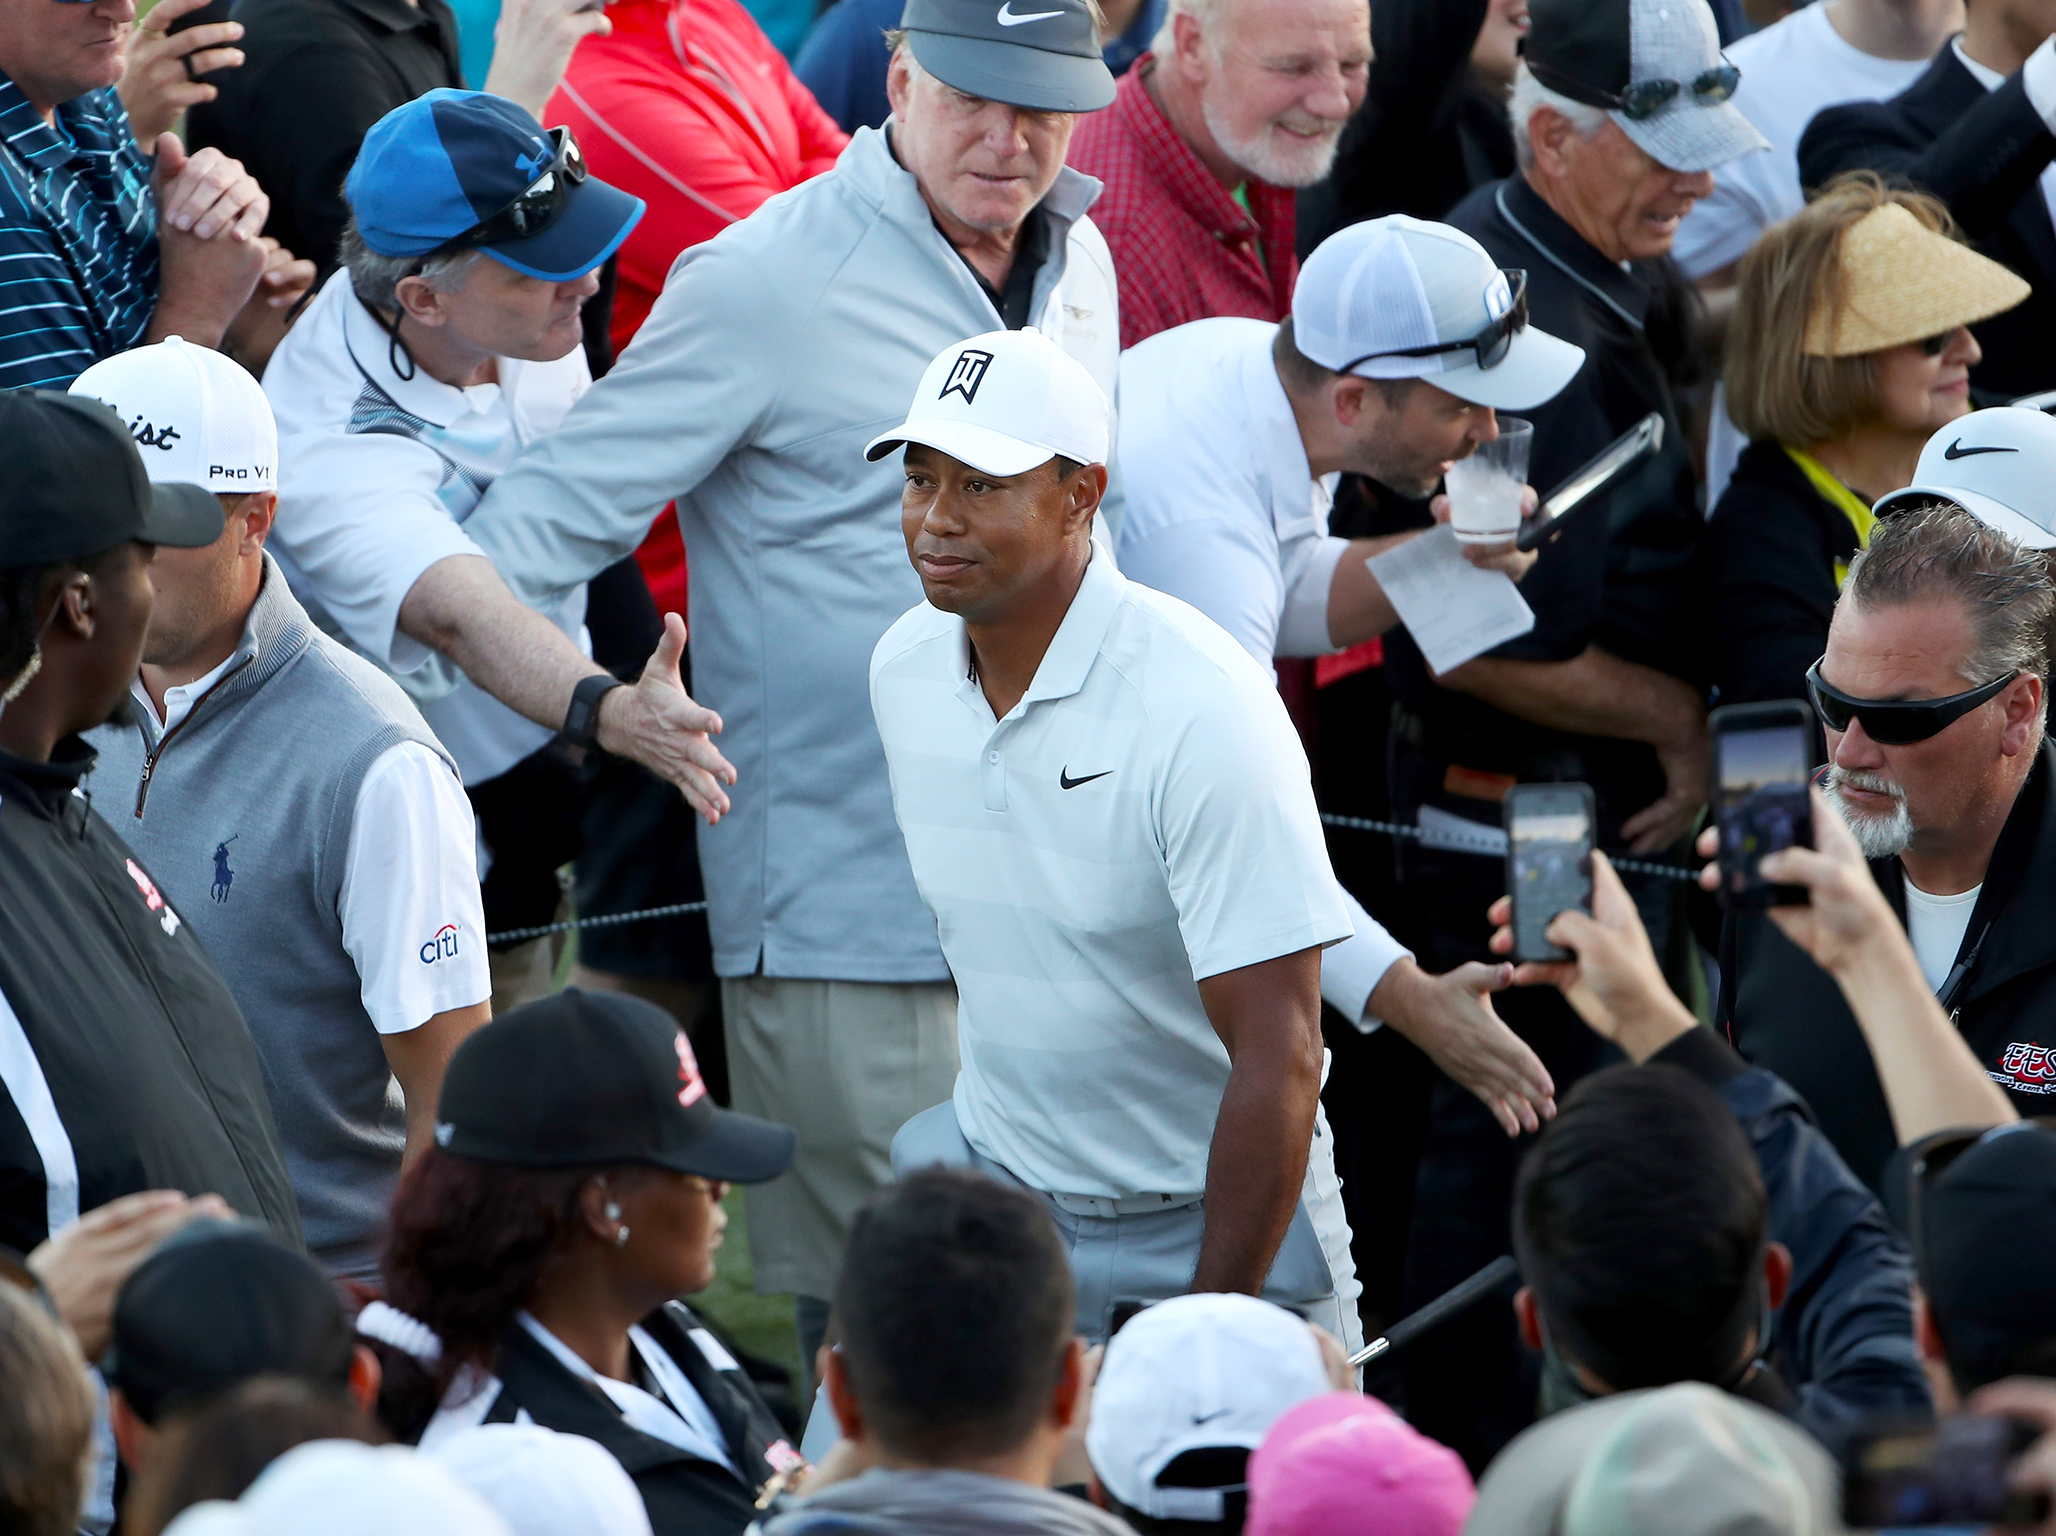 Huge crowds followed Tigers Woods around the Riviera Country Club